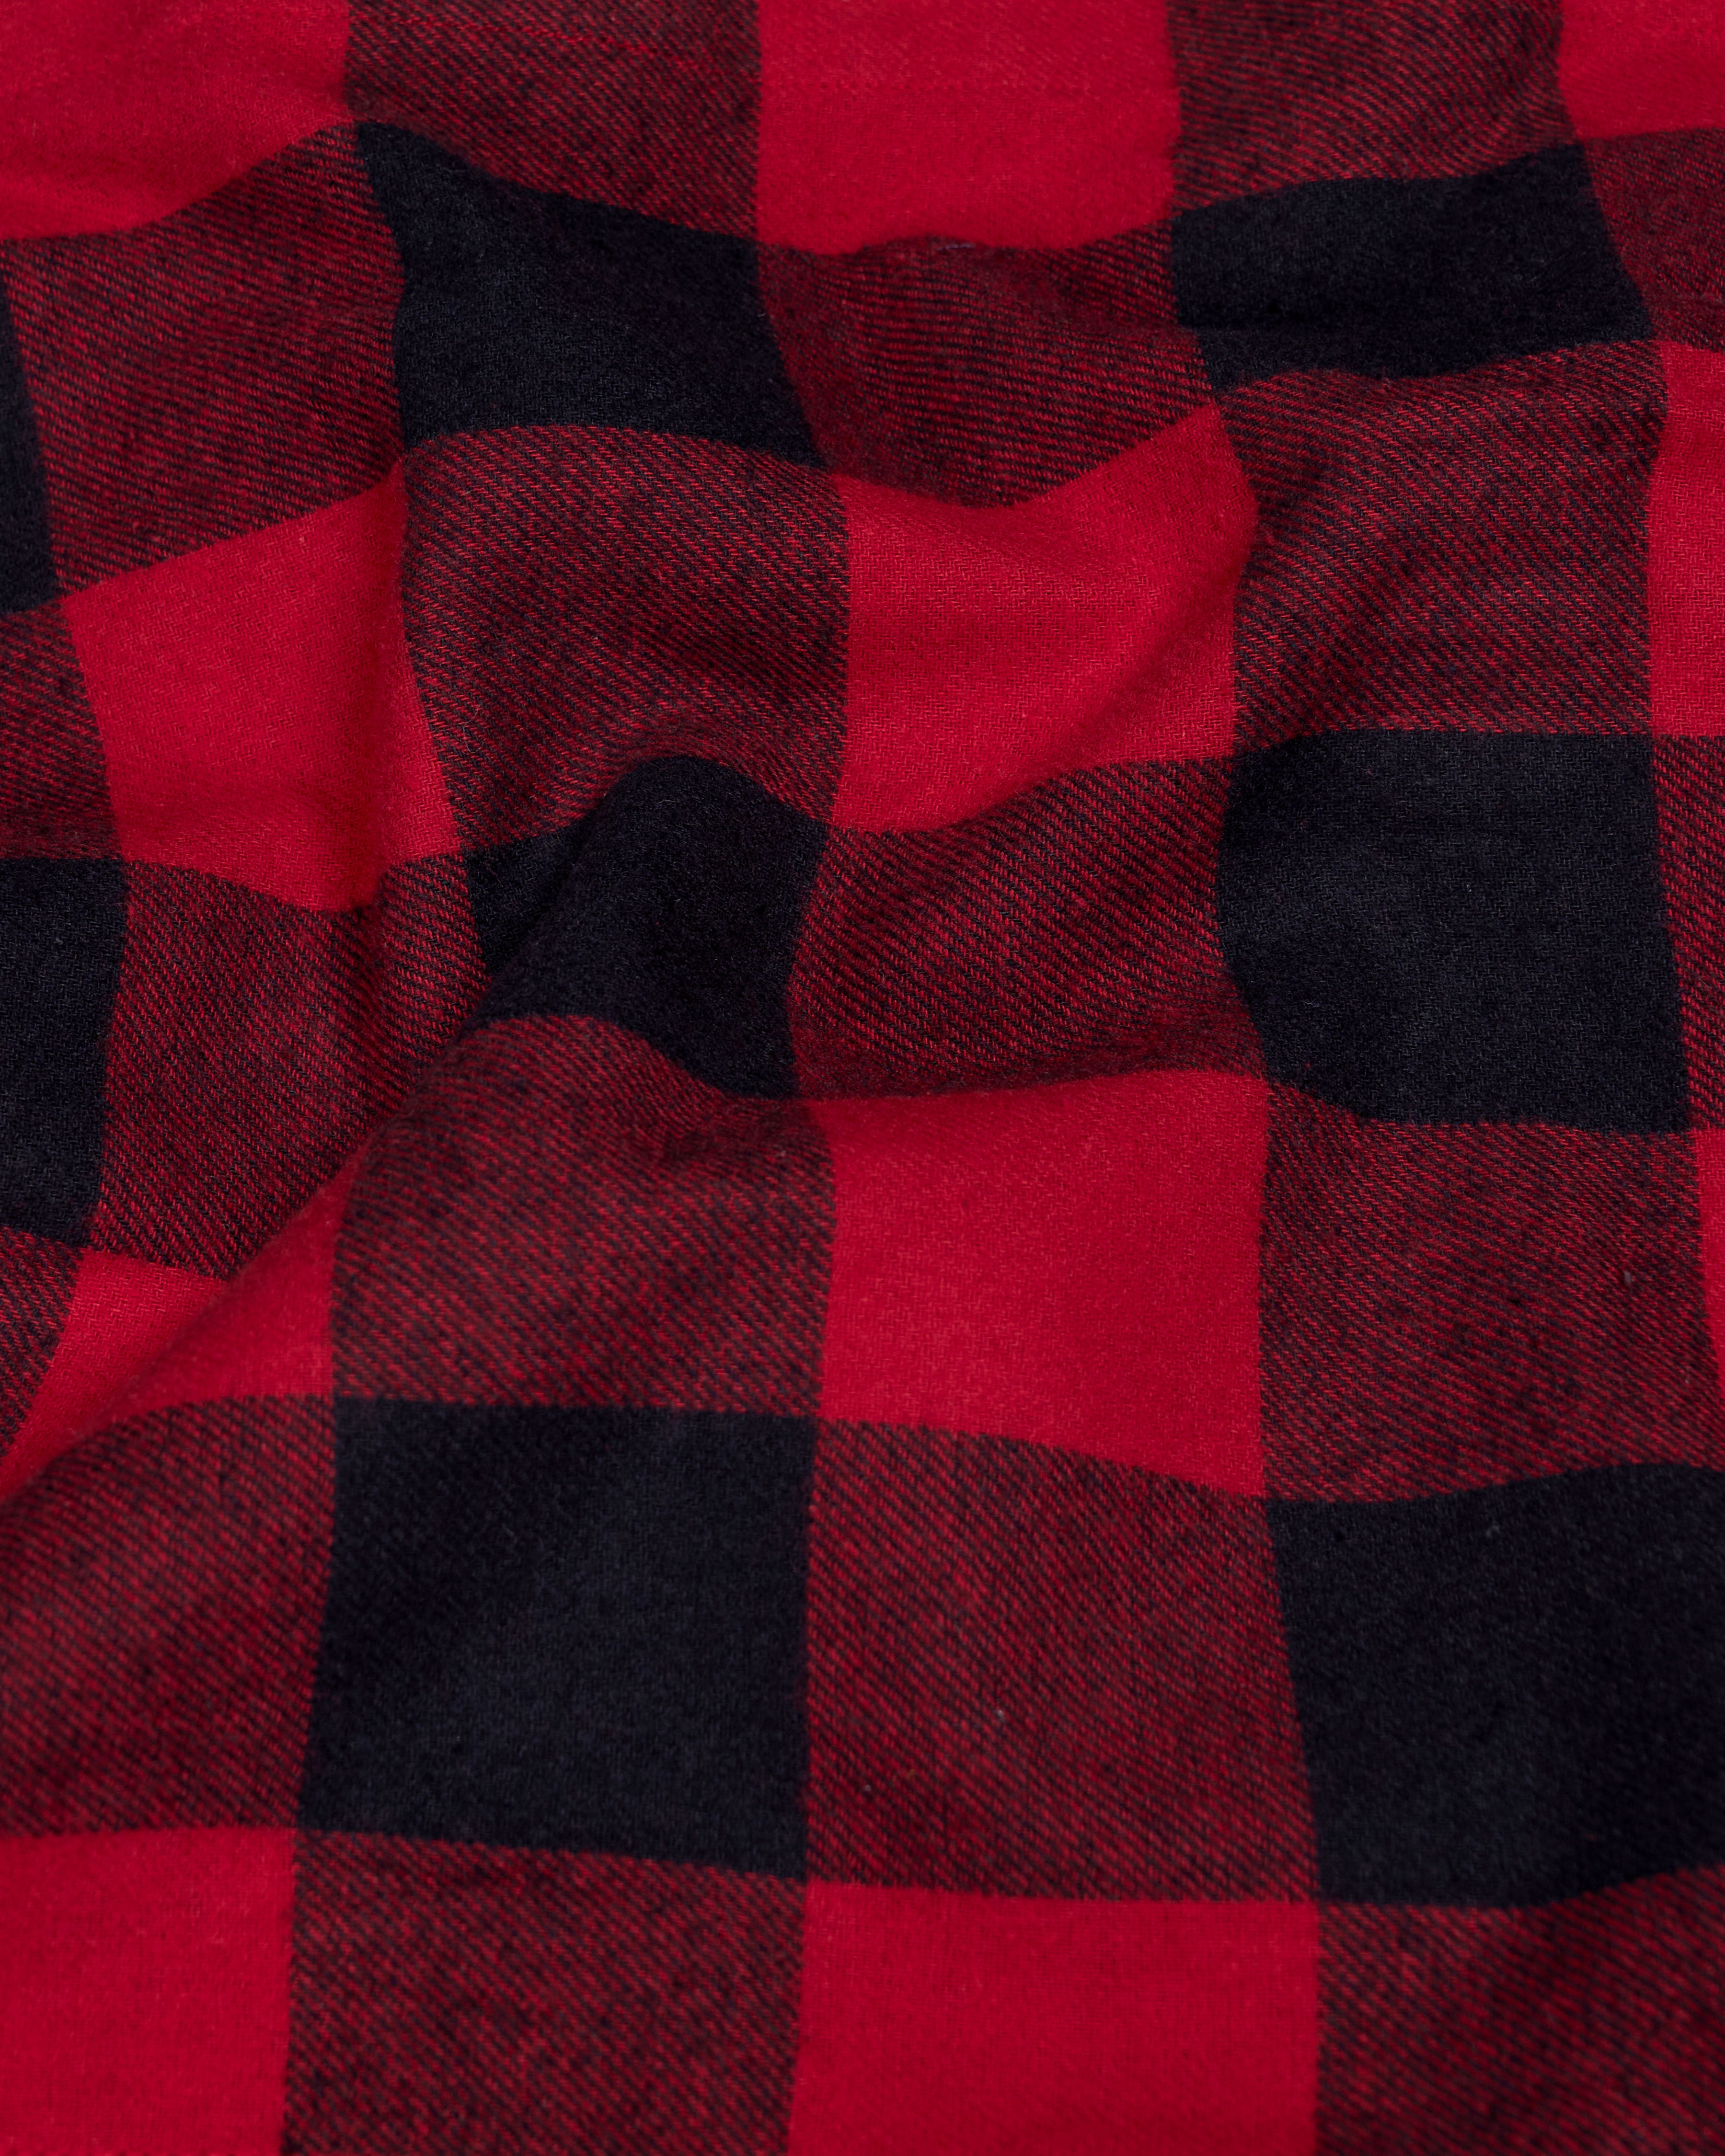 Carmine Red and Black Checked Flannel Overshirt/Shacket 9458-BD-OS-38, 9458-BD-OS-H-38, 9458-BD-OS-39, 9458-BD-OS-H-39, 9458-BD-OS-40, 9458-BD-OS-H-40, 9458-BD-OS-42, 9458-BD-OS-H-42, 9458-BD-OS-44, 9458-BD-OS-H-44, 9458-BD-OS-46, 9458-BD-OS-H-46, 9458-BD-OS-48, 9458-BD-OS-H-48, 9458-BD-OS-50, 9458-BD-OS-H-50, 9458-BD-OS-52, 9458-BD-OS-H-52